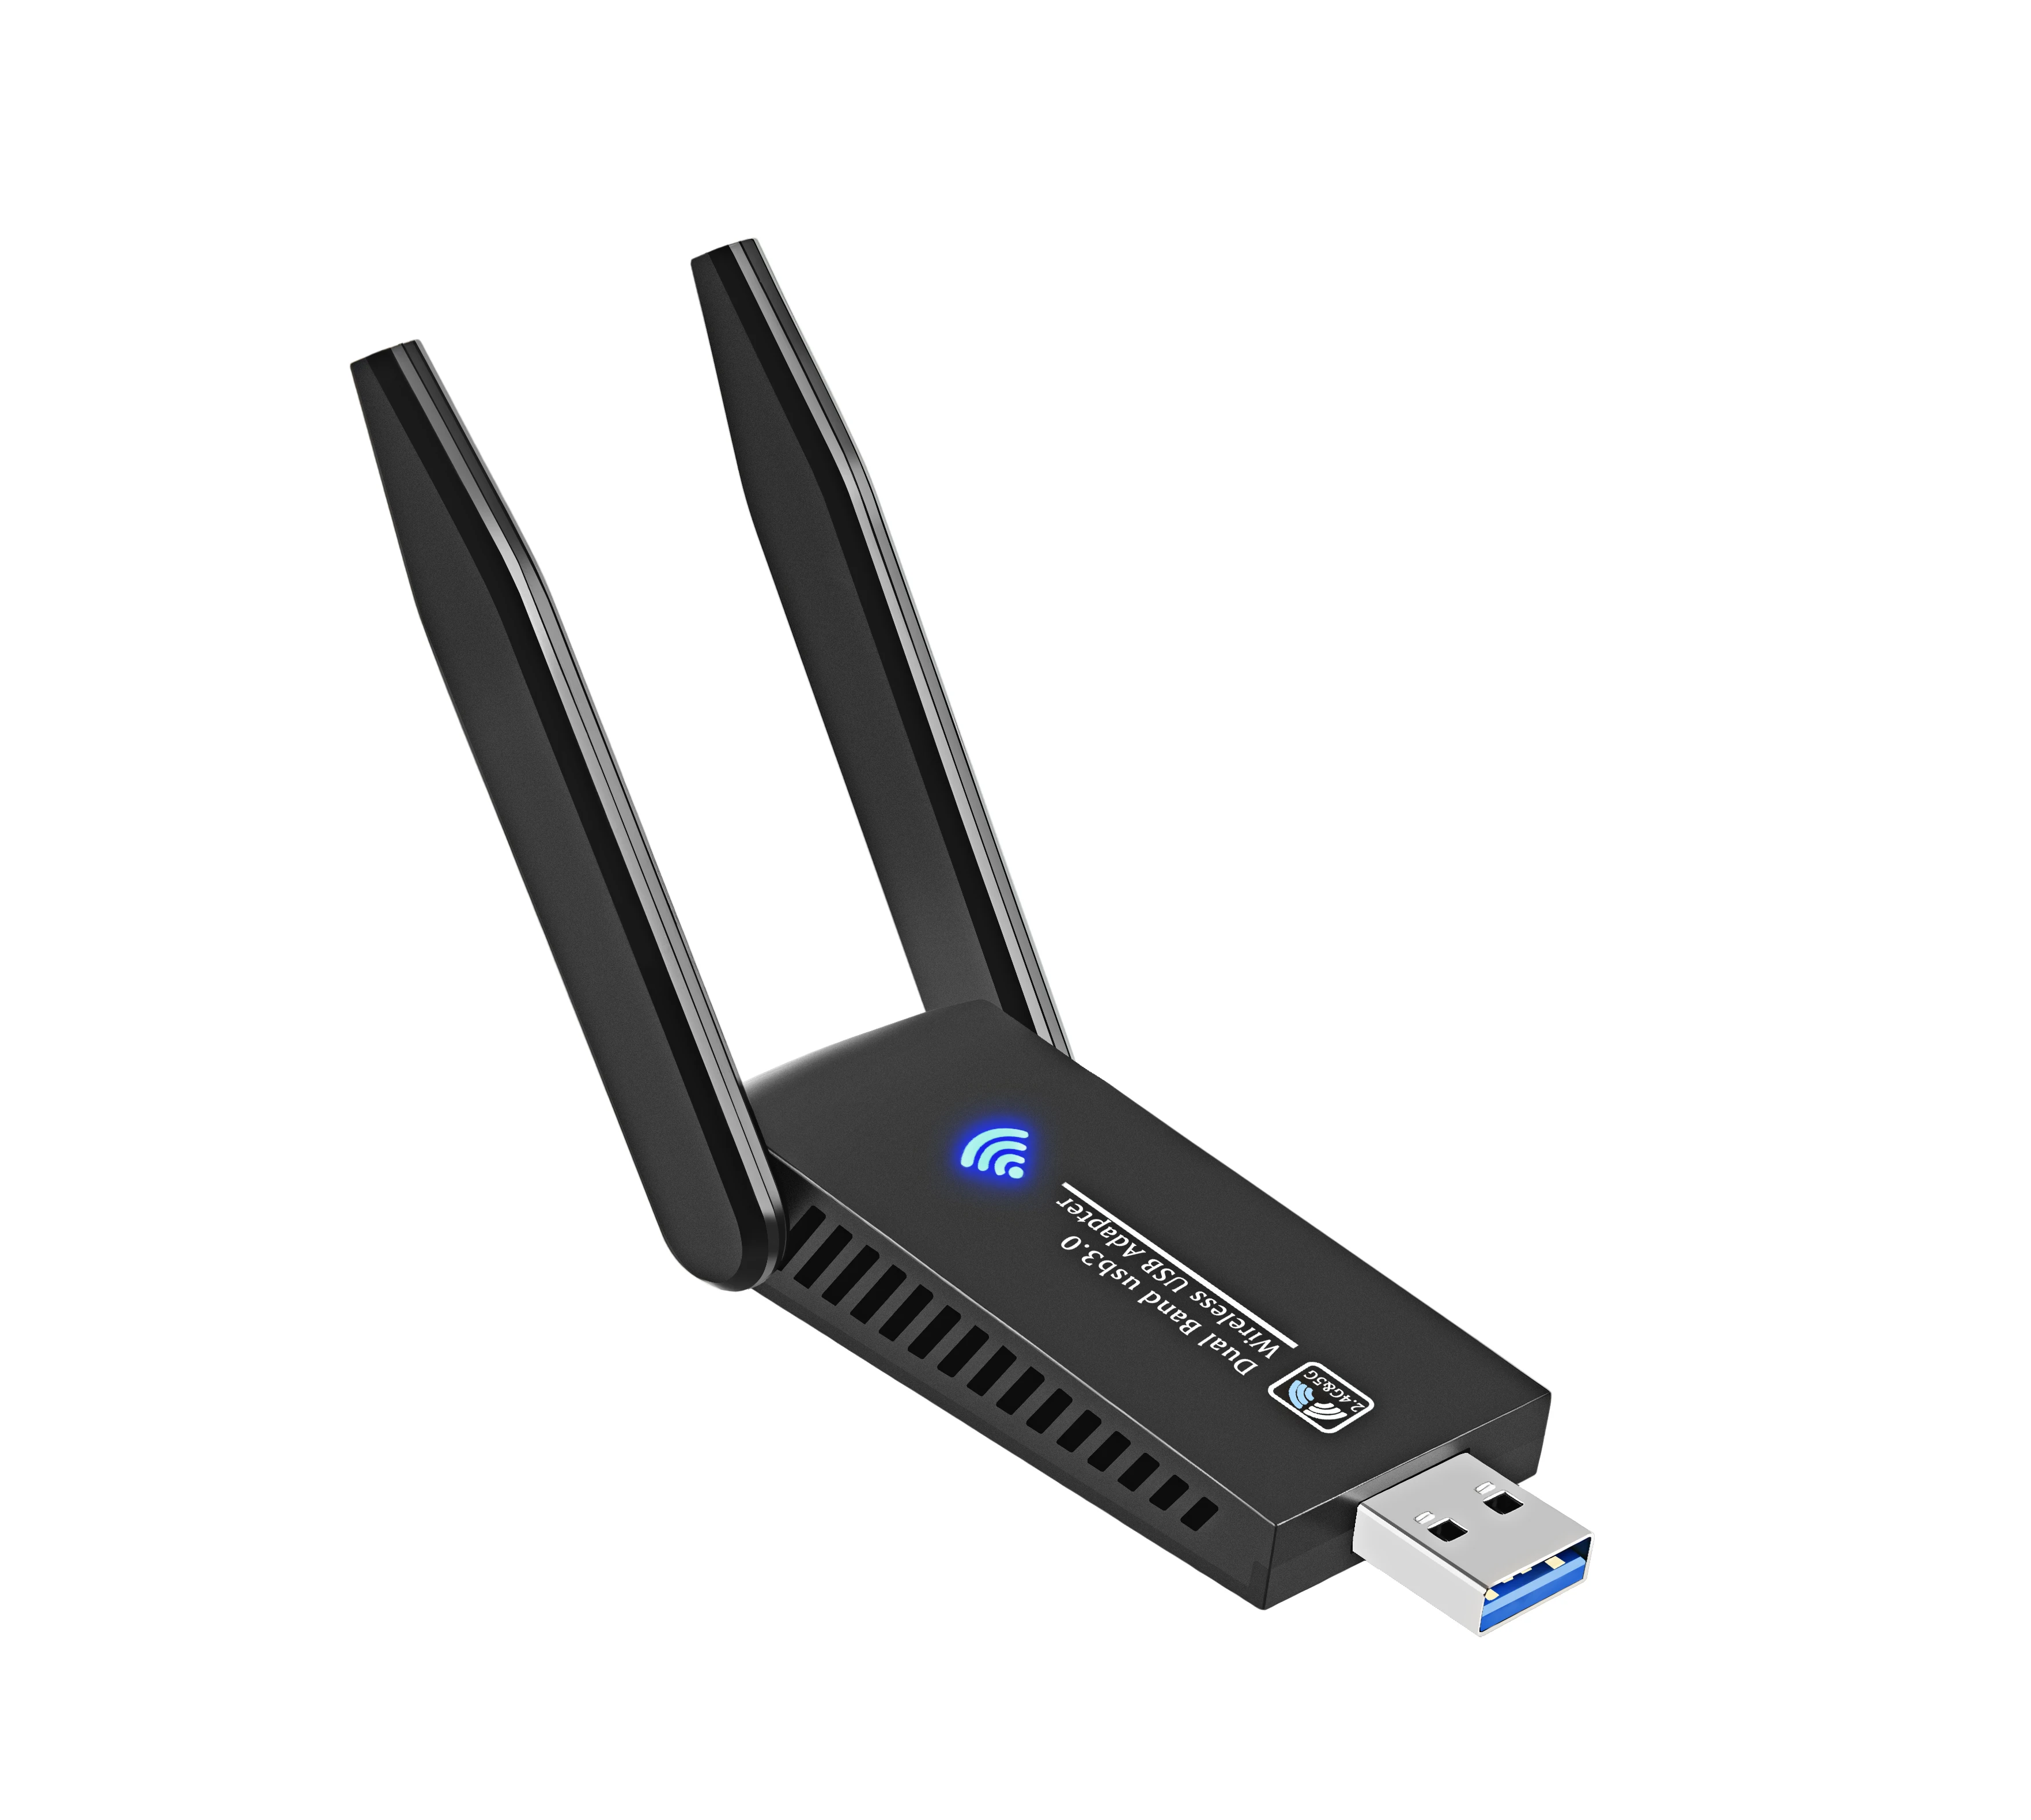 

2.4G Mini WiFi dongle USB3.0 WiFi Adapter Receiver 5GHz 300Mbps High Speed Network Card wireless adapter usb wifi For PC